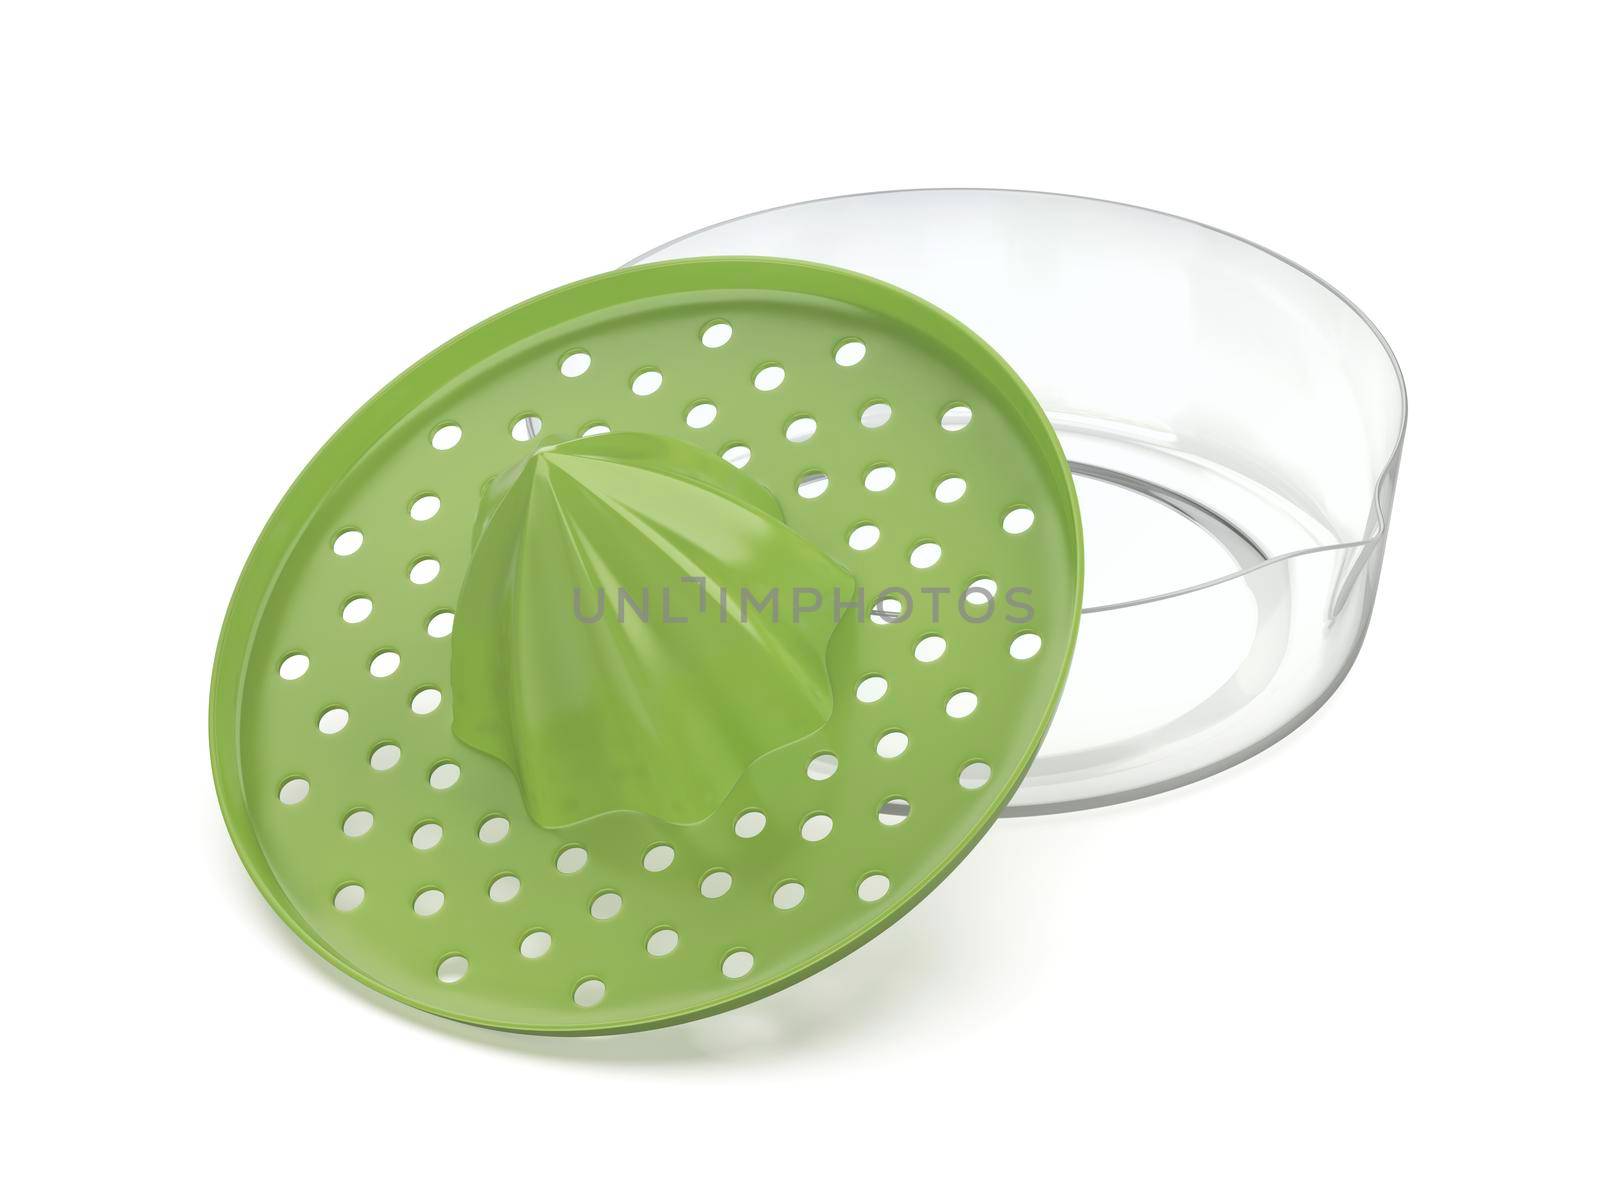 Citrus squeezer by magraphics